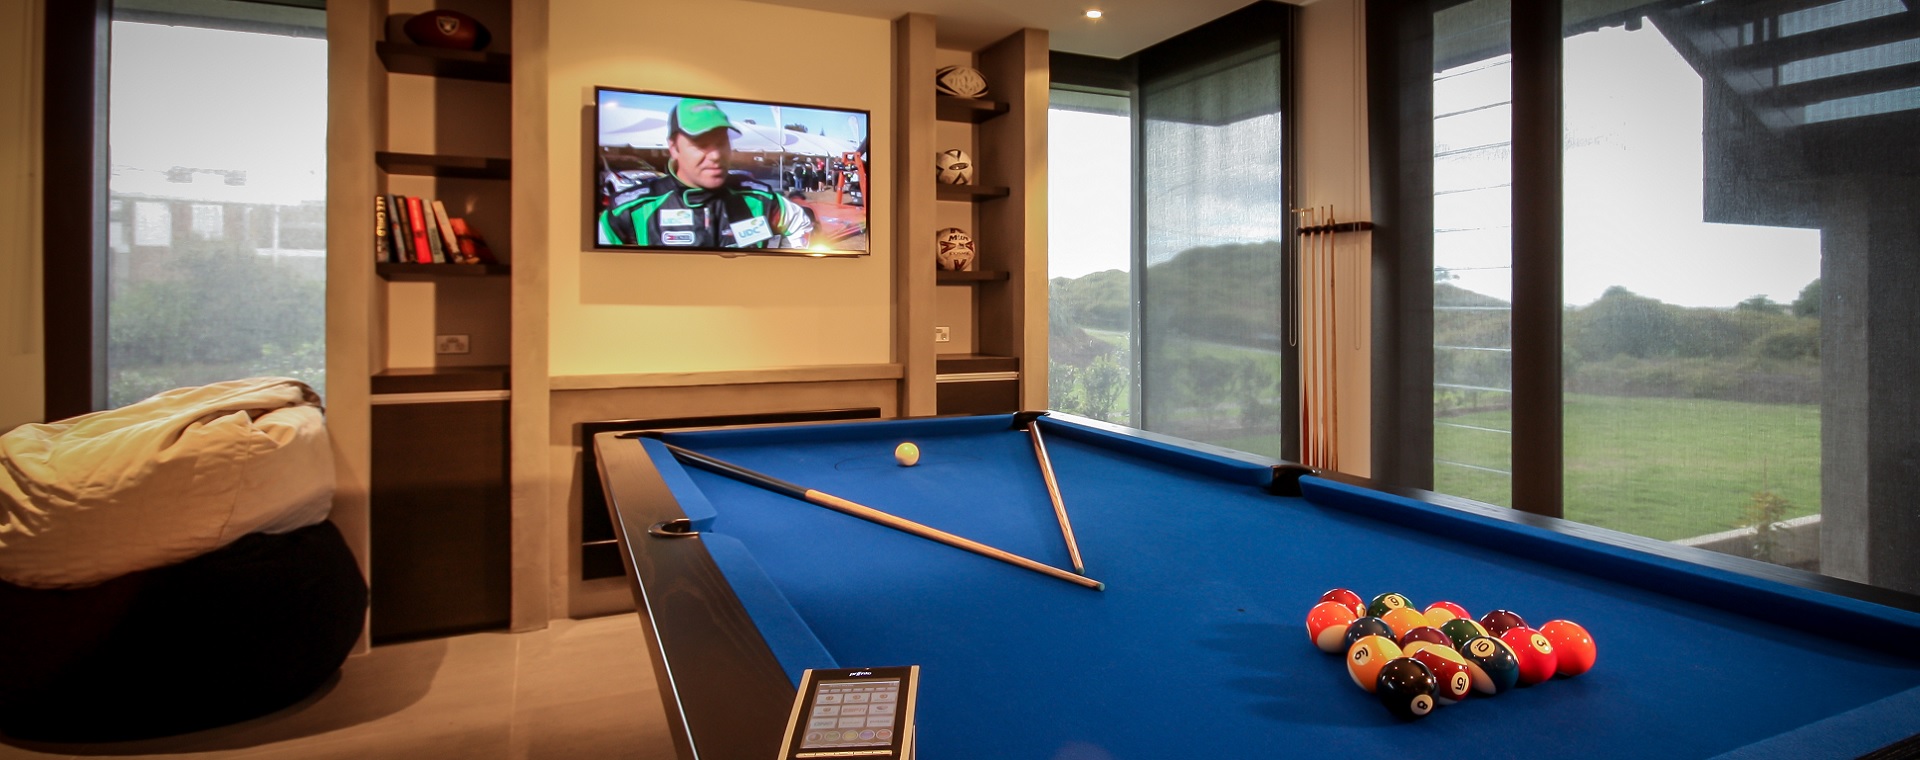 Man-cave with pool table, large TV, bean bags, books and memorabilia featuring home automation touchscreen control